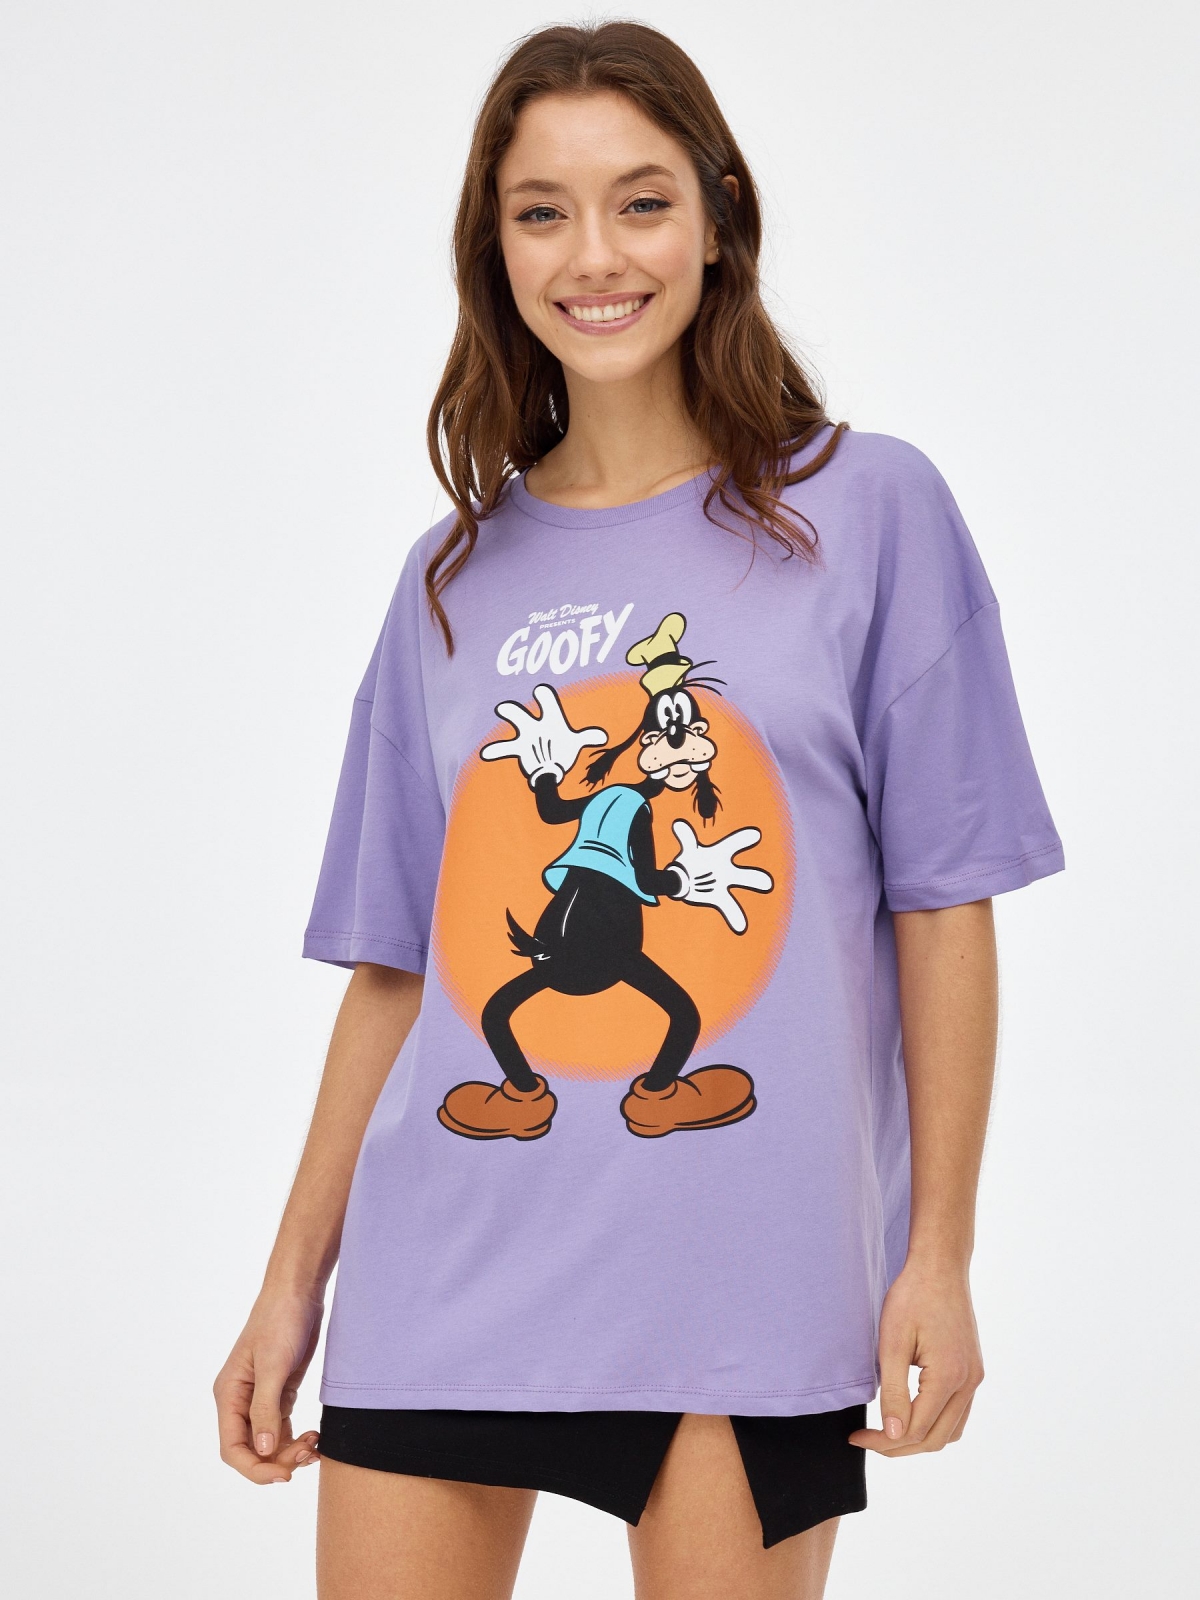 Goofy t-shirt lilac middle front view